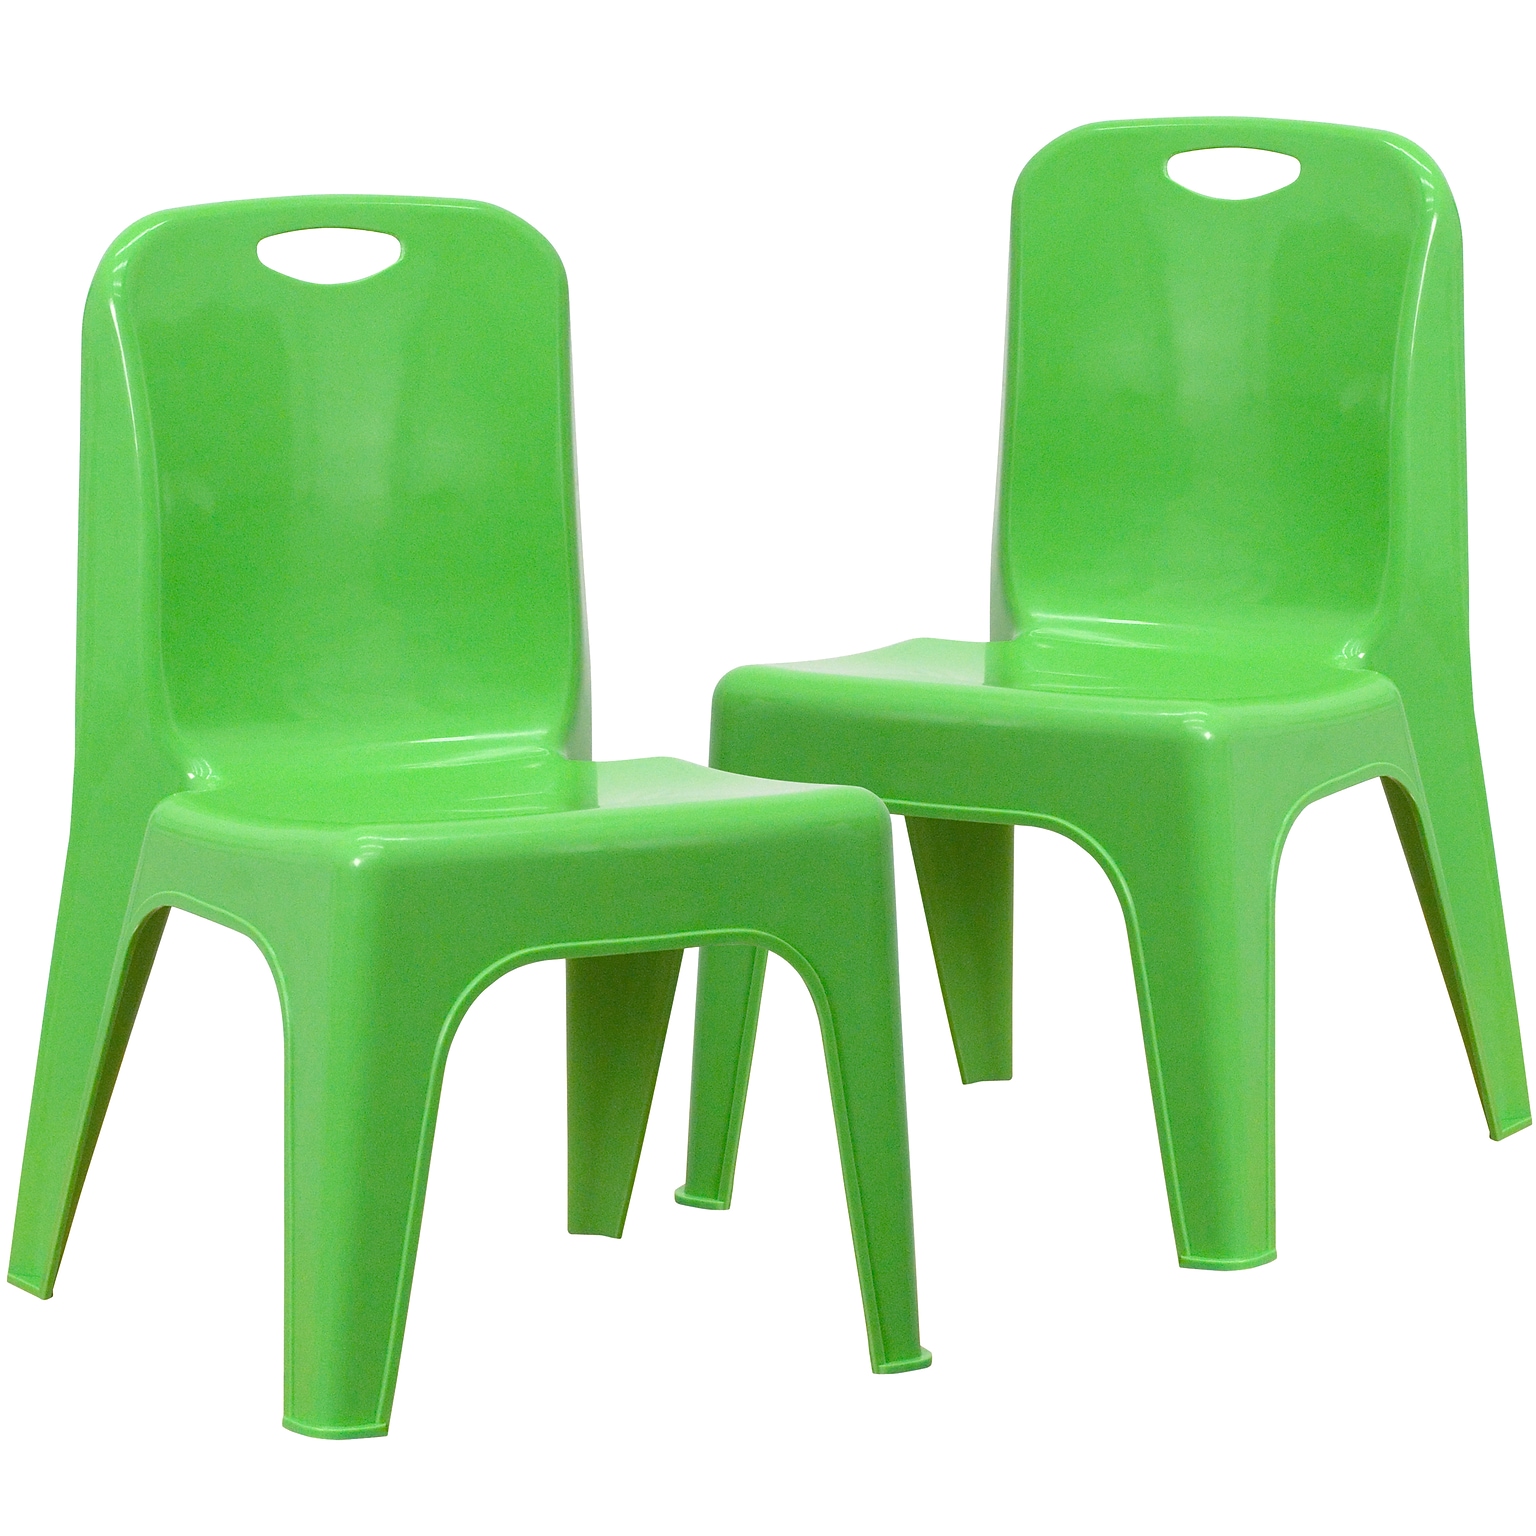 Flash Furniture Plastic School Chair with Carrying Handle and 11 Seat Height, Green, 2-Pieces (2YUYCX011GREEN)